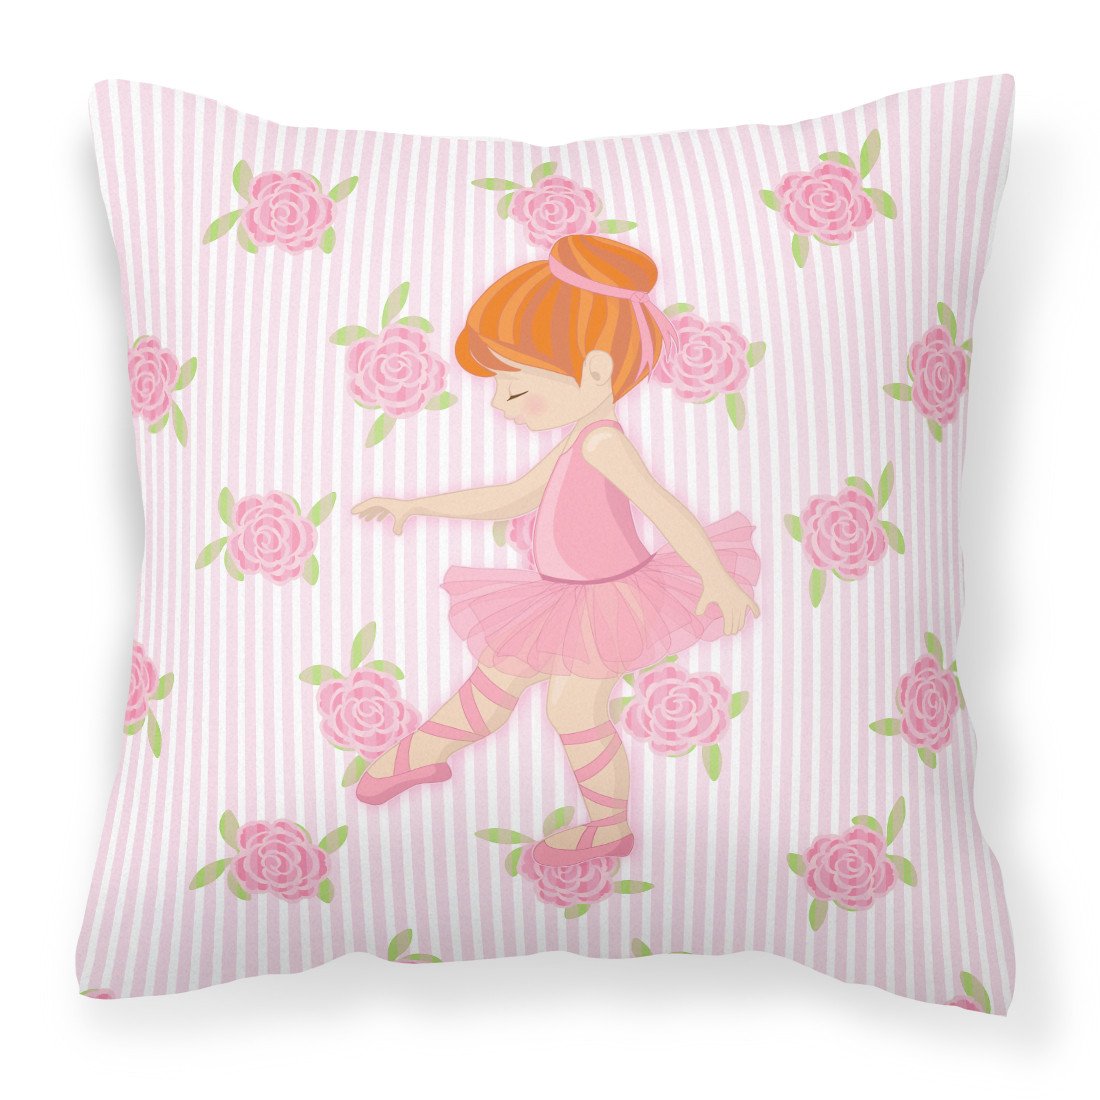 Ballerina Red Head Point Fabric Decorative Pillow BB5170PW1818 by Caroline's Treasures